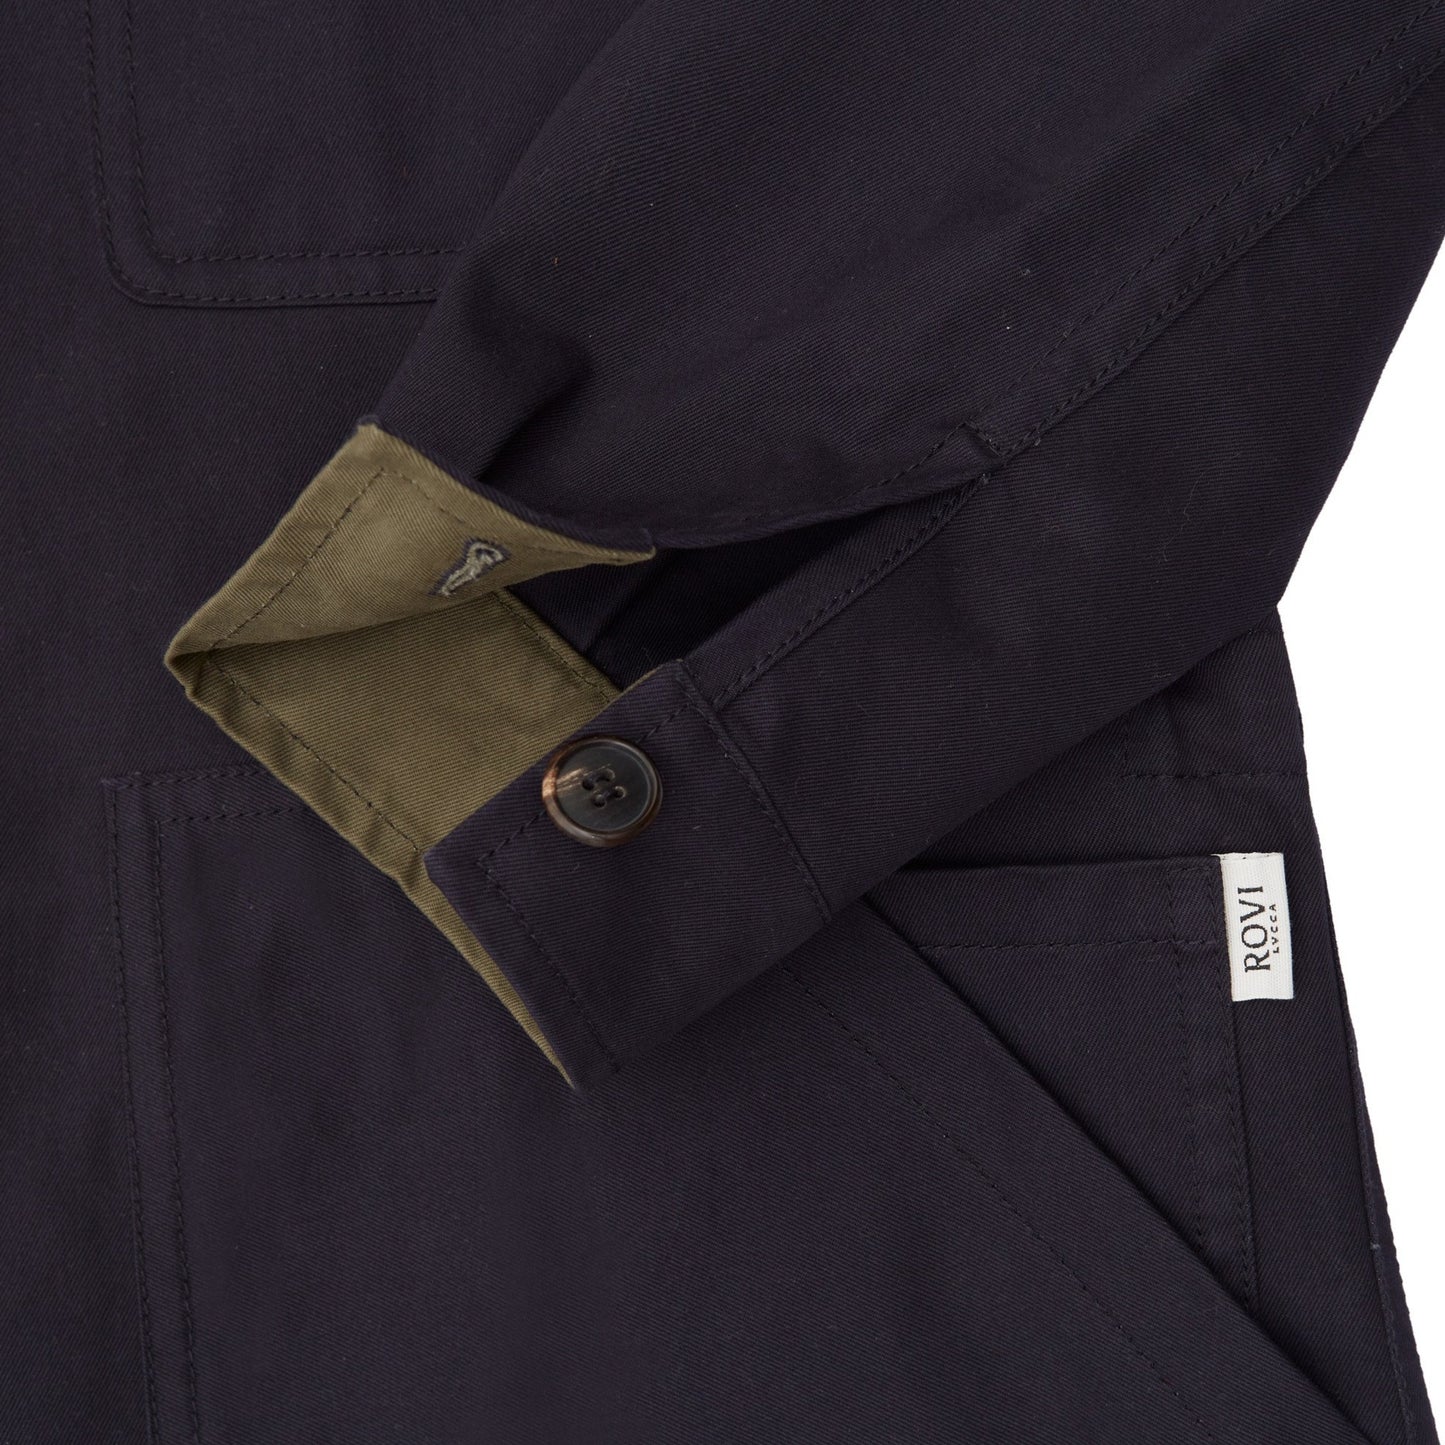 Unlined Garden Jacket in Navy and Green Cotton Twill